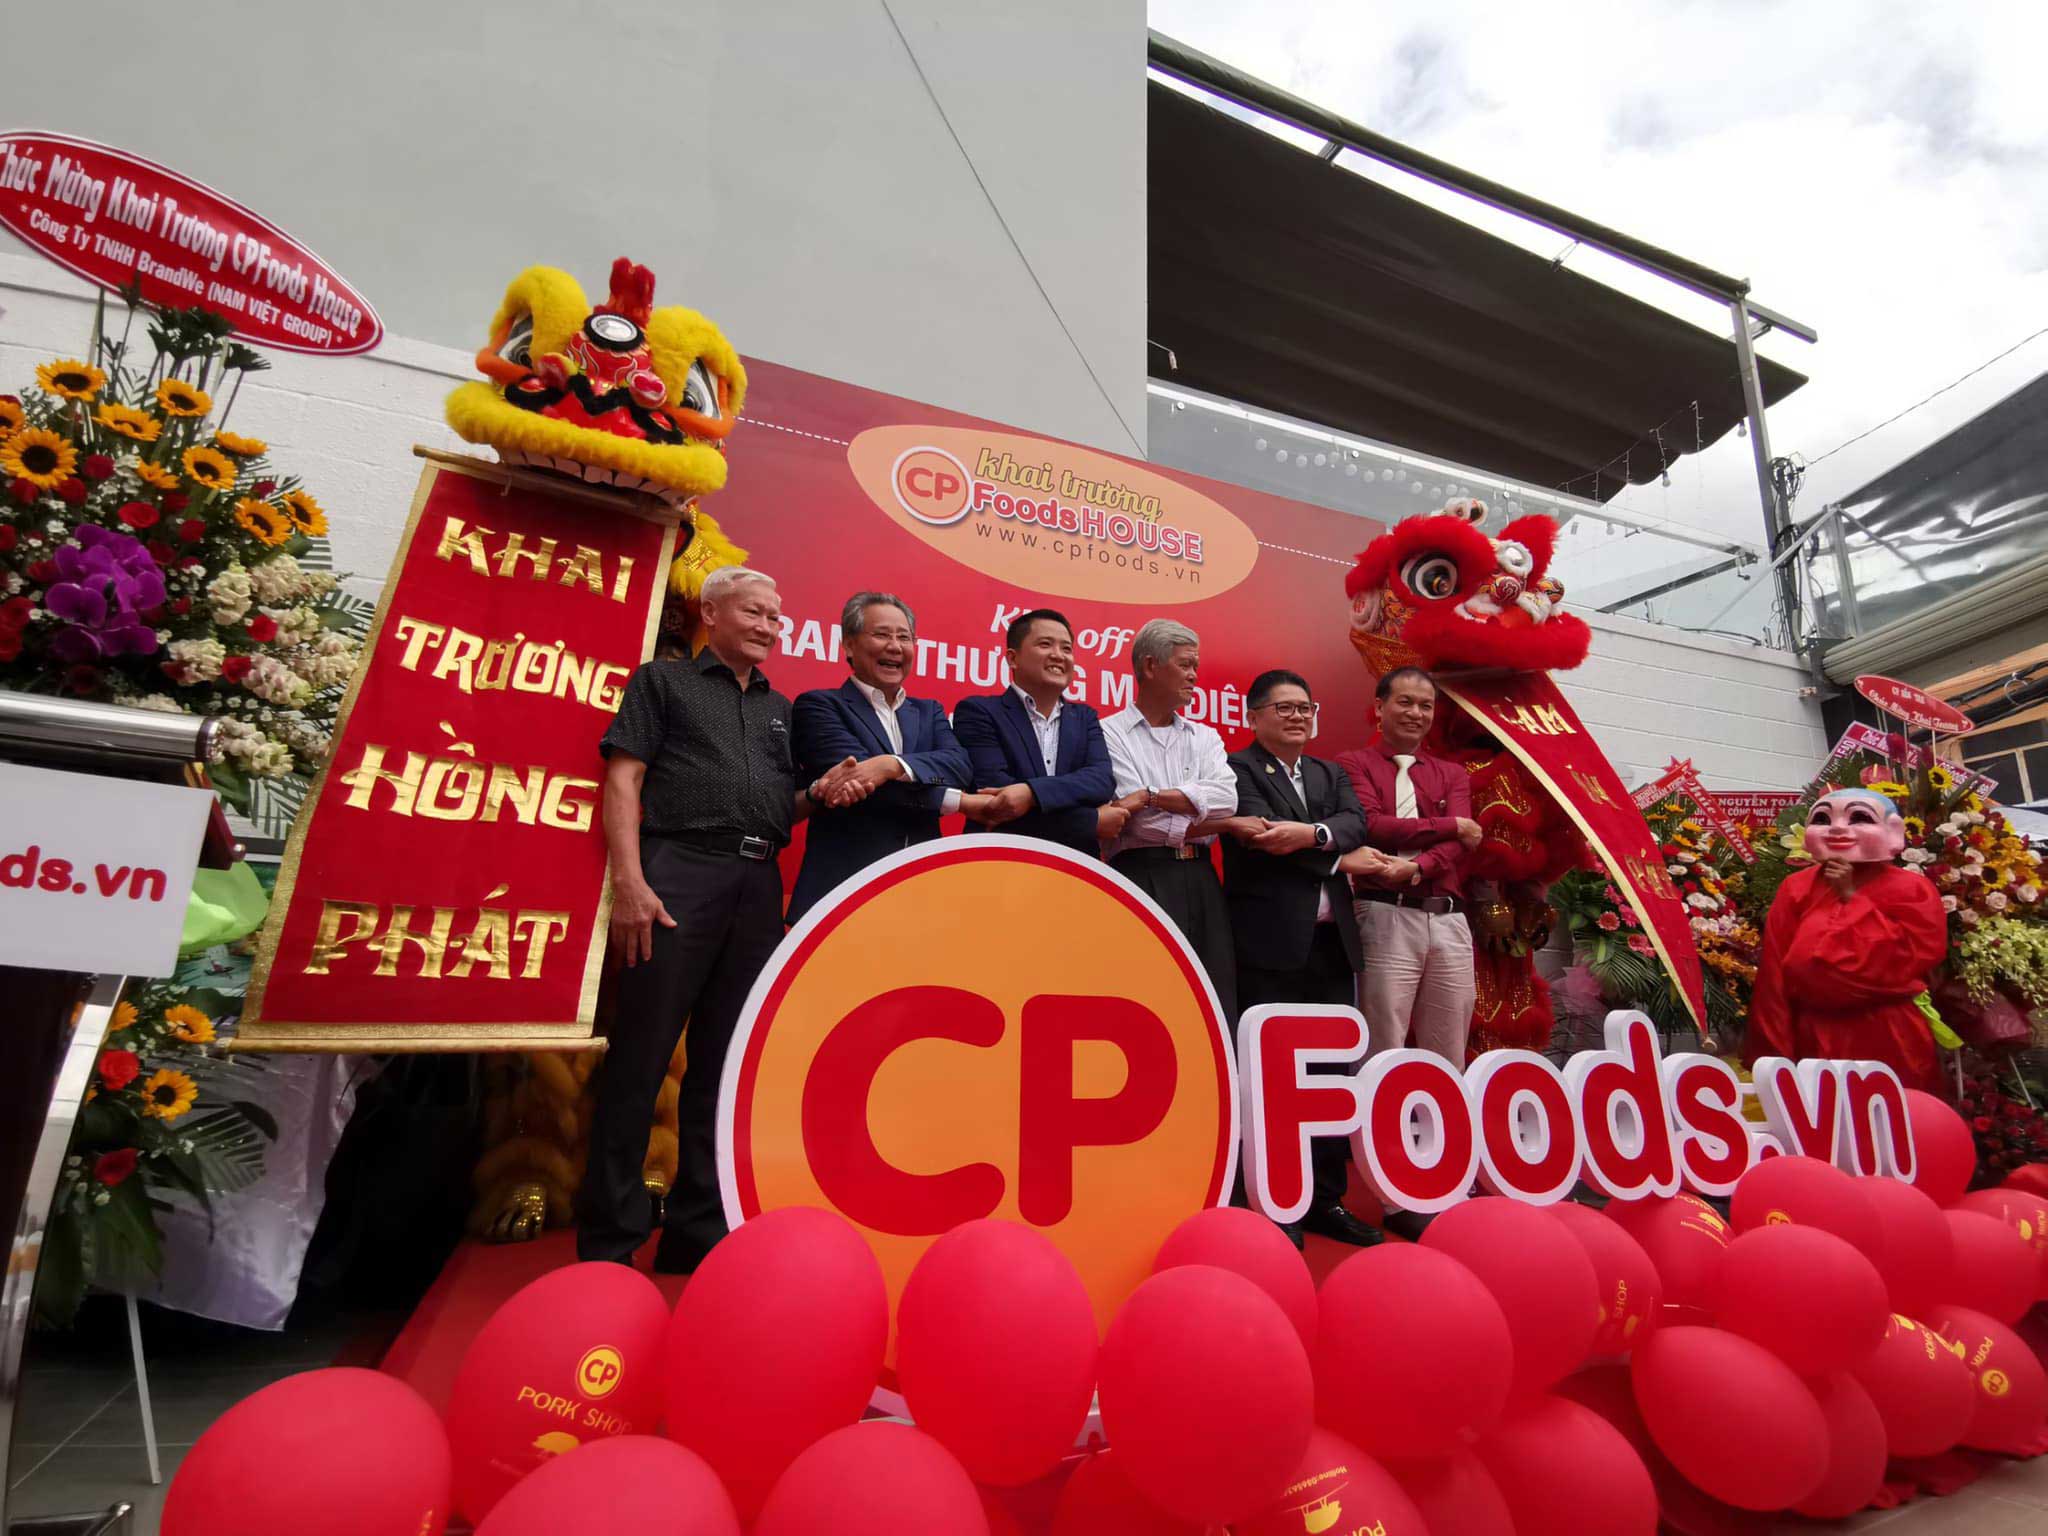 CP Vietnam celebrated its new branch CP Foods House in Ho Chi Minh City.